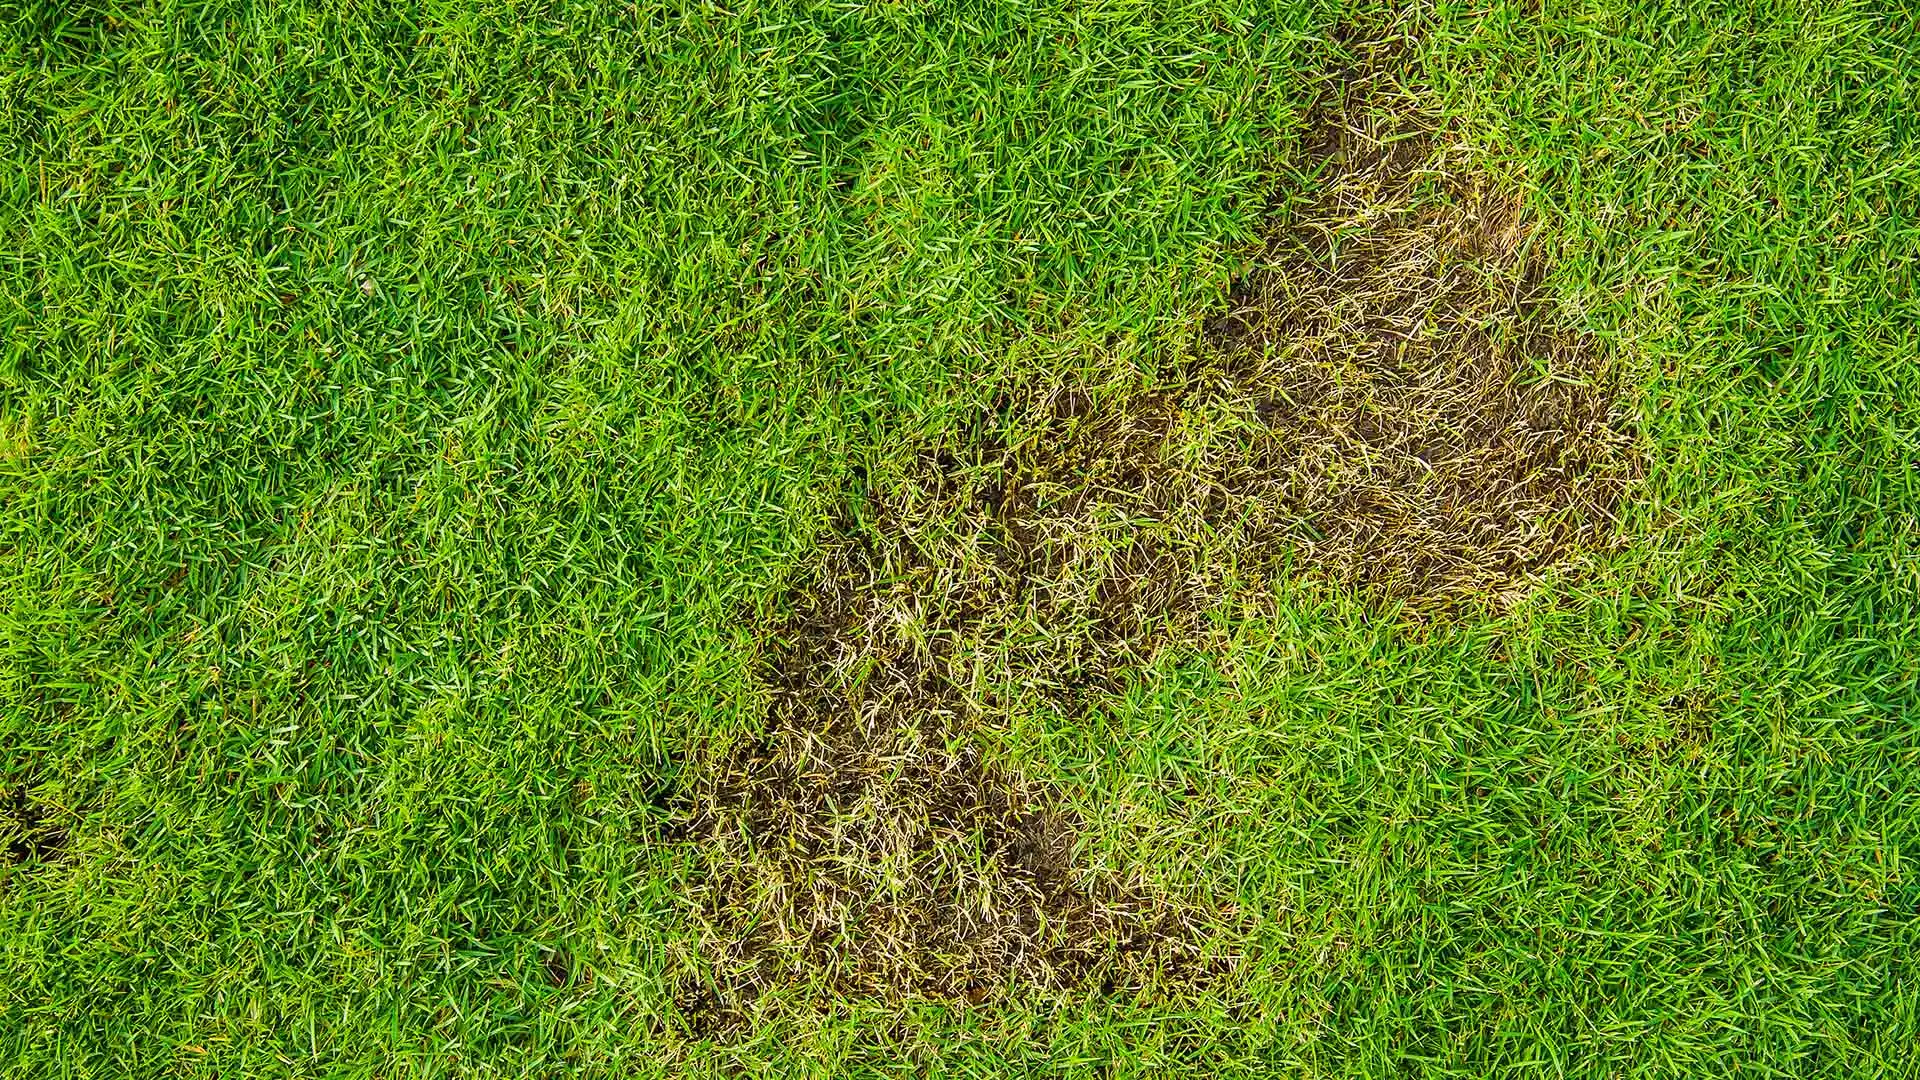 Are Grubs Making a Meal Out of Your Lawn? Here’s What to Do!